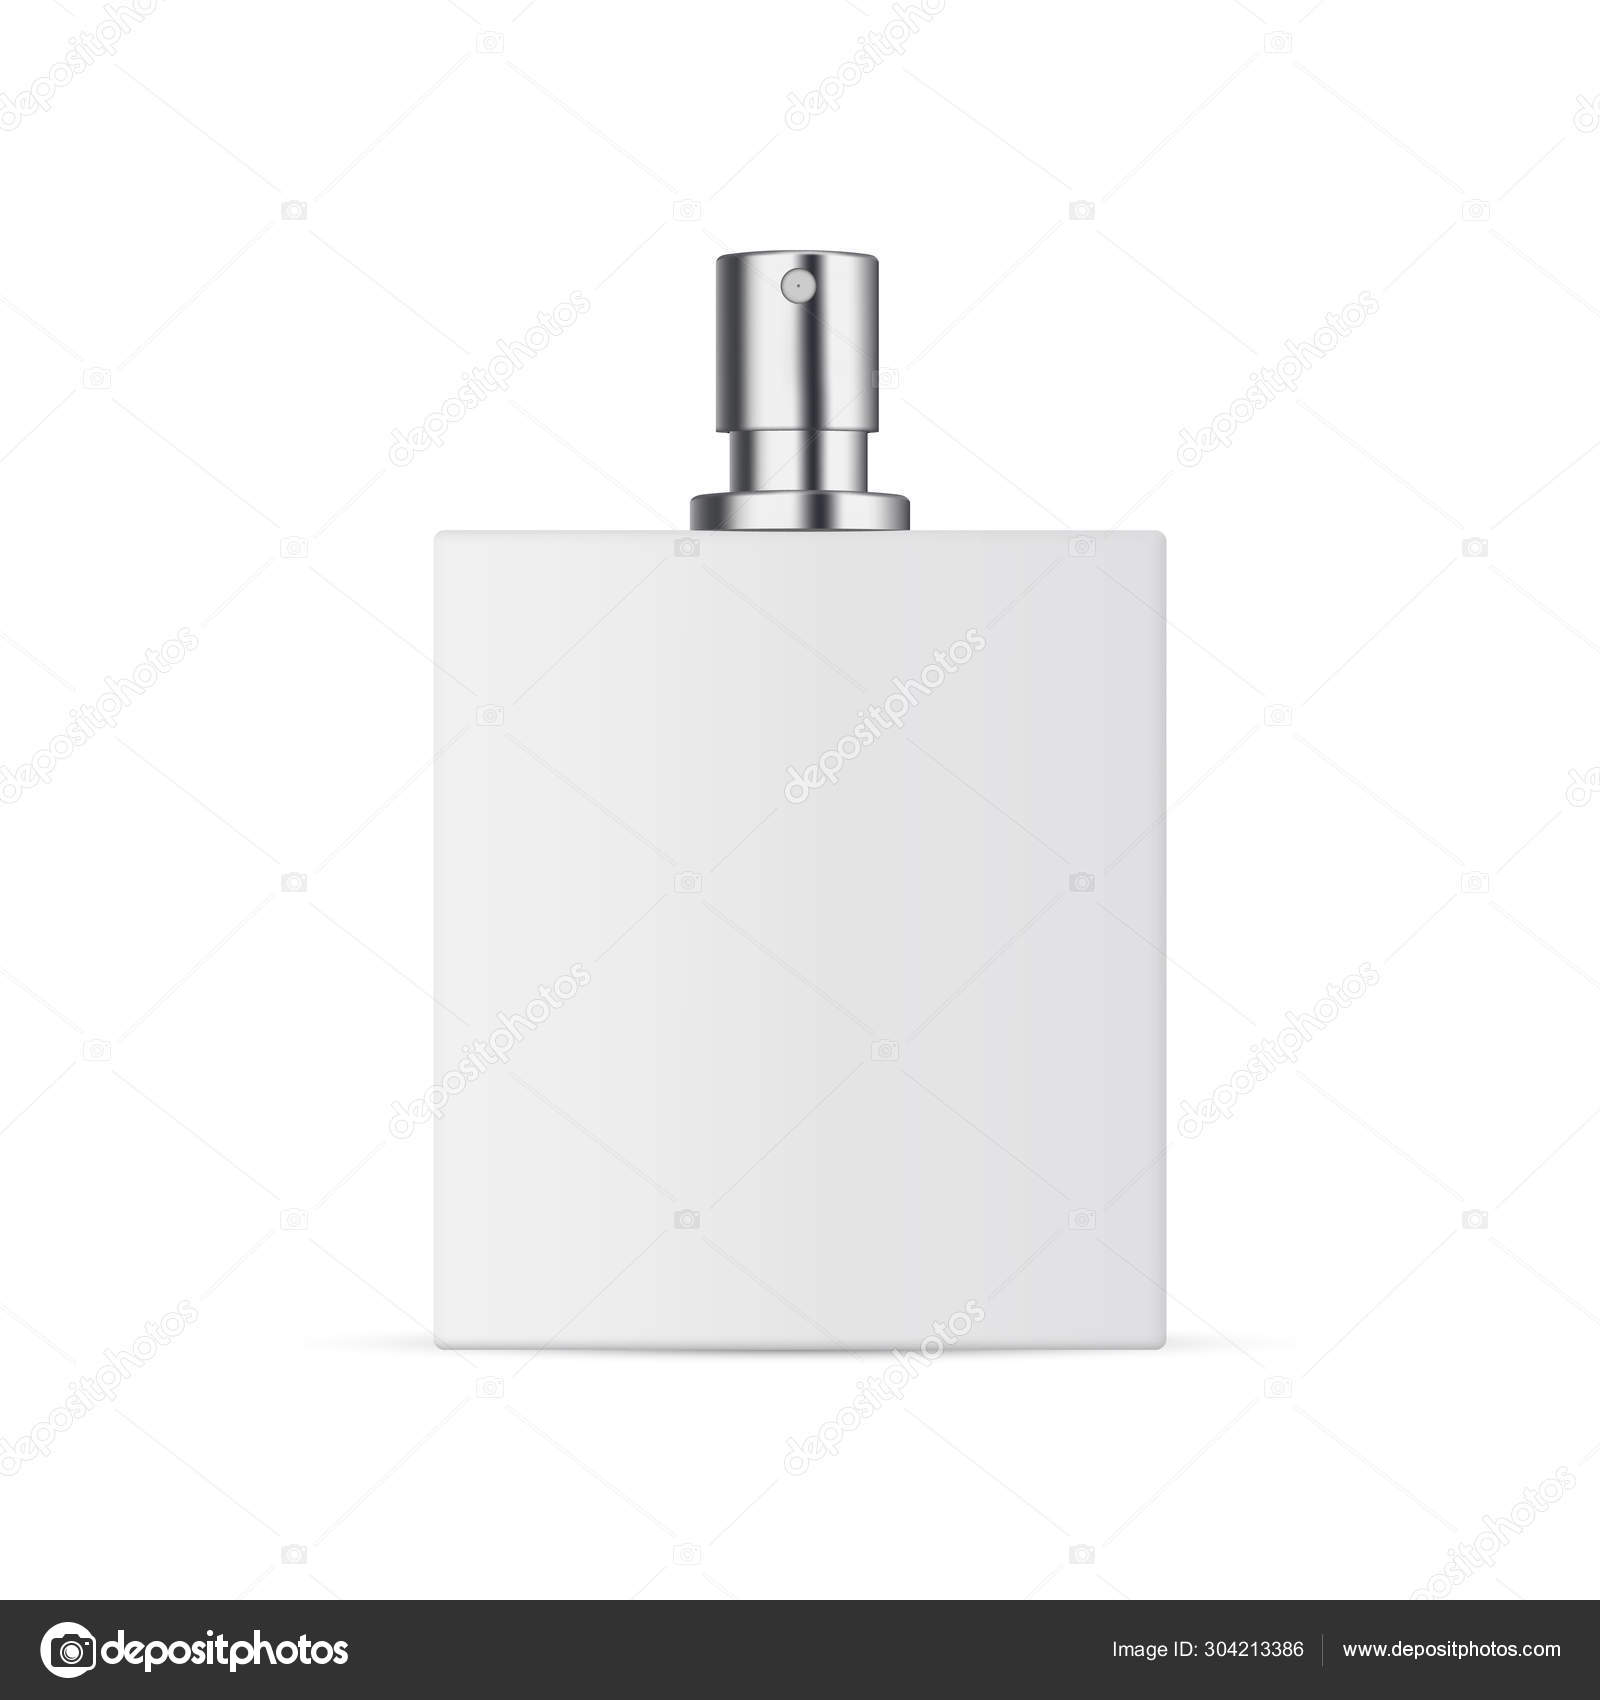 Download Opened Perfume Bottle Mockup Isolated White Background Vector Illustration Stock Vector Royalty Free Vector Image By C Evgeniyzimin 304213386